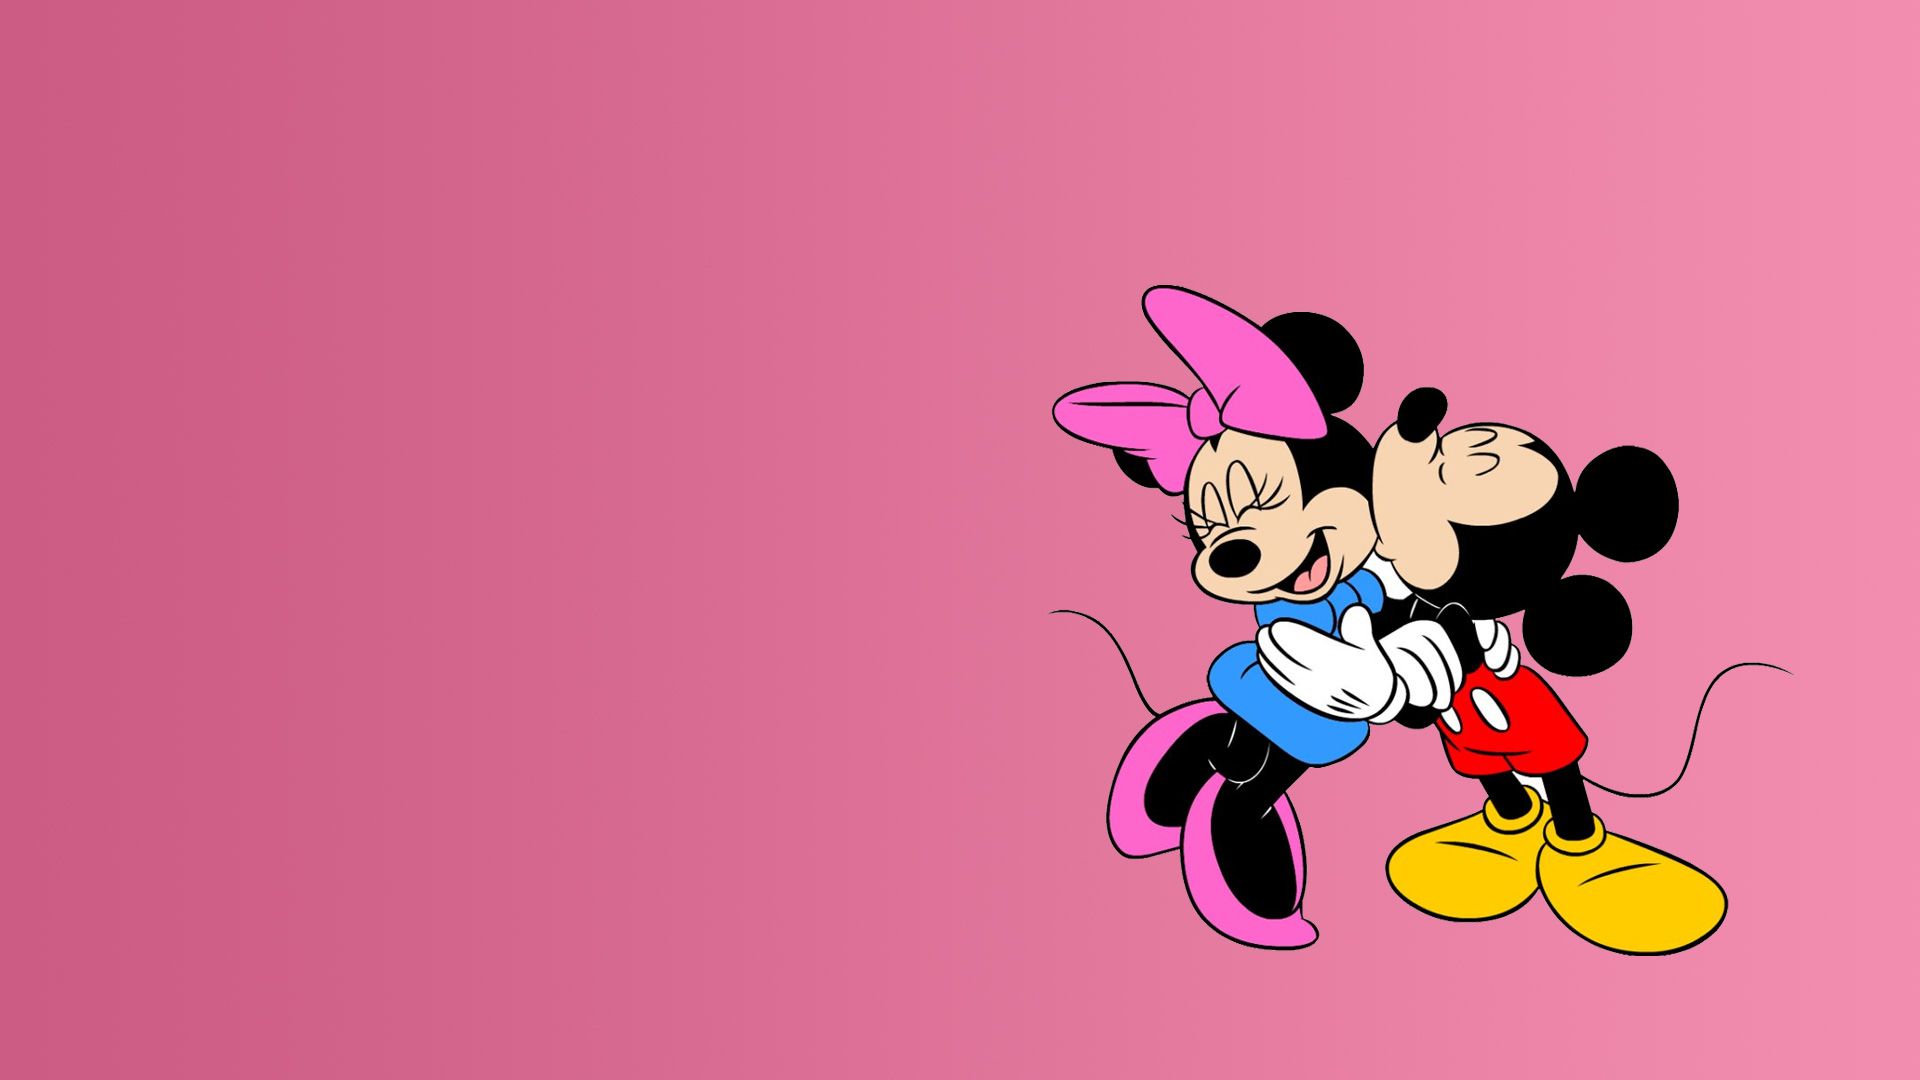 Mouse Wallpaper. Mickey Mouse Wallpaper